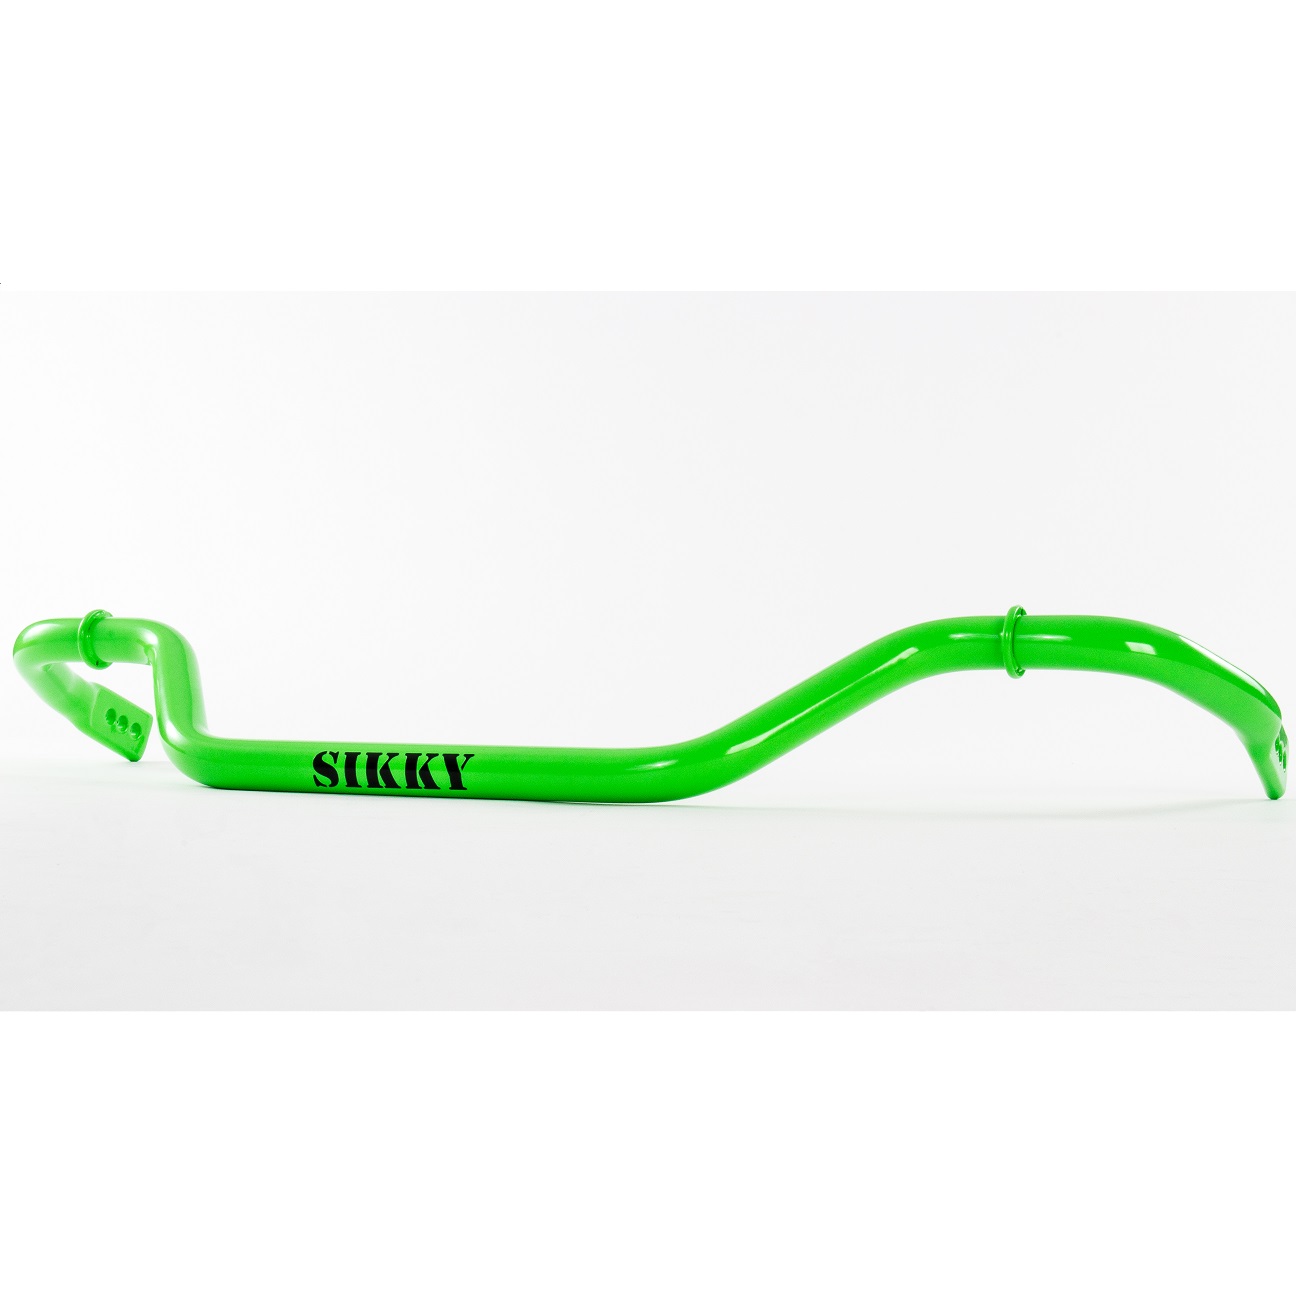 Sikky Infiniti G35 33mm Front Sway Bar